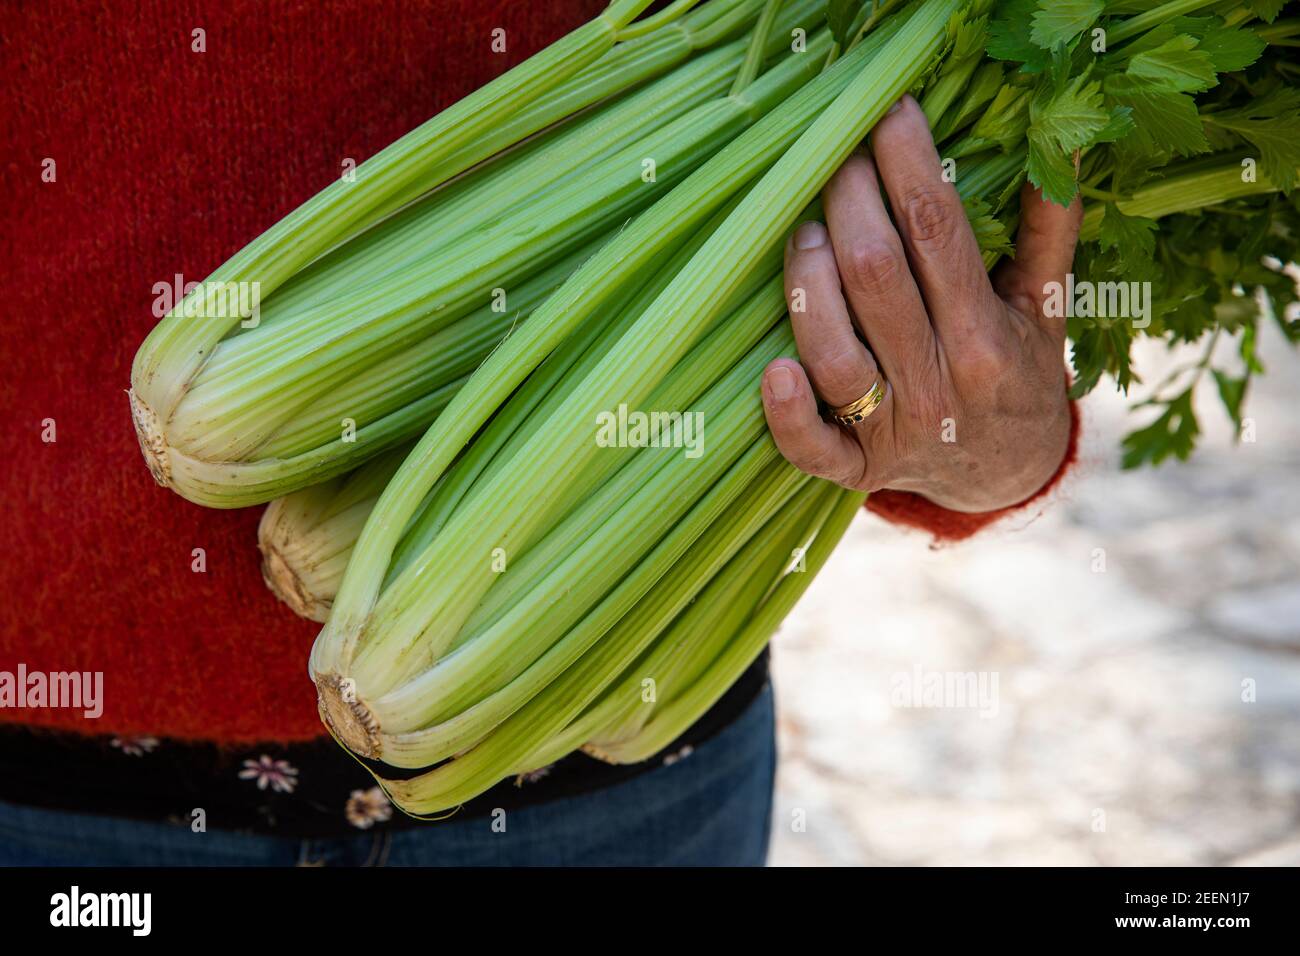 Woman collecting celery from kitchen garden Stock Photo